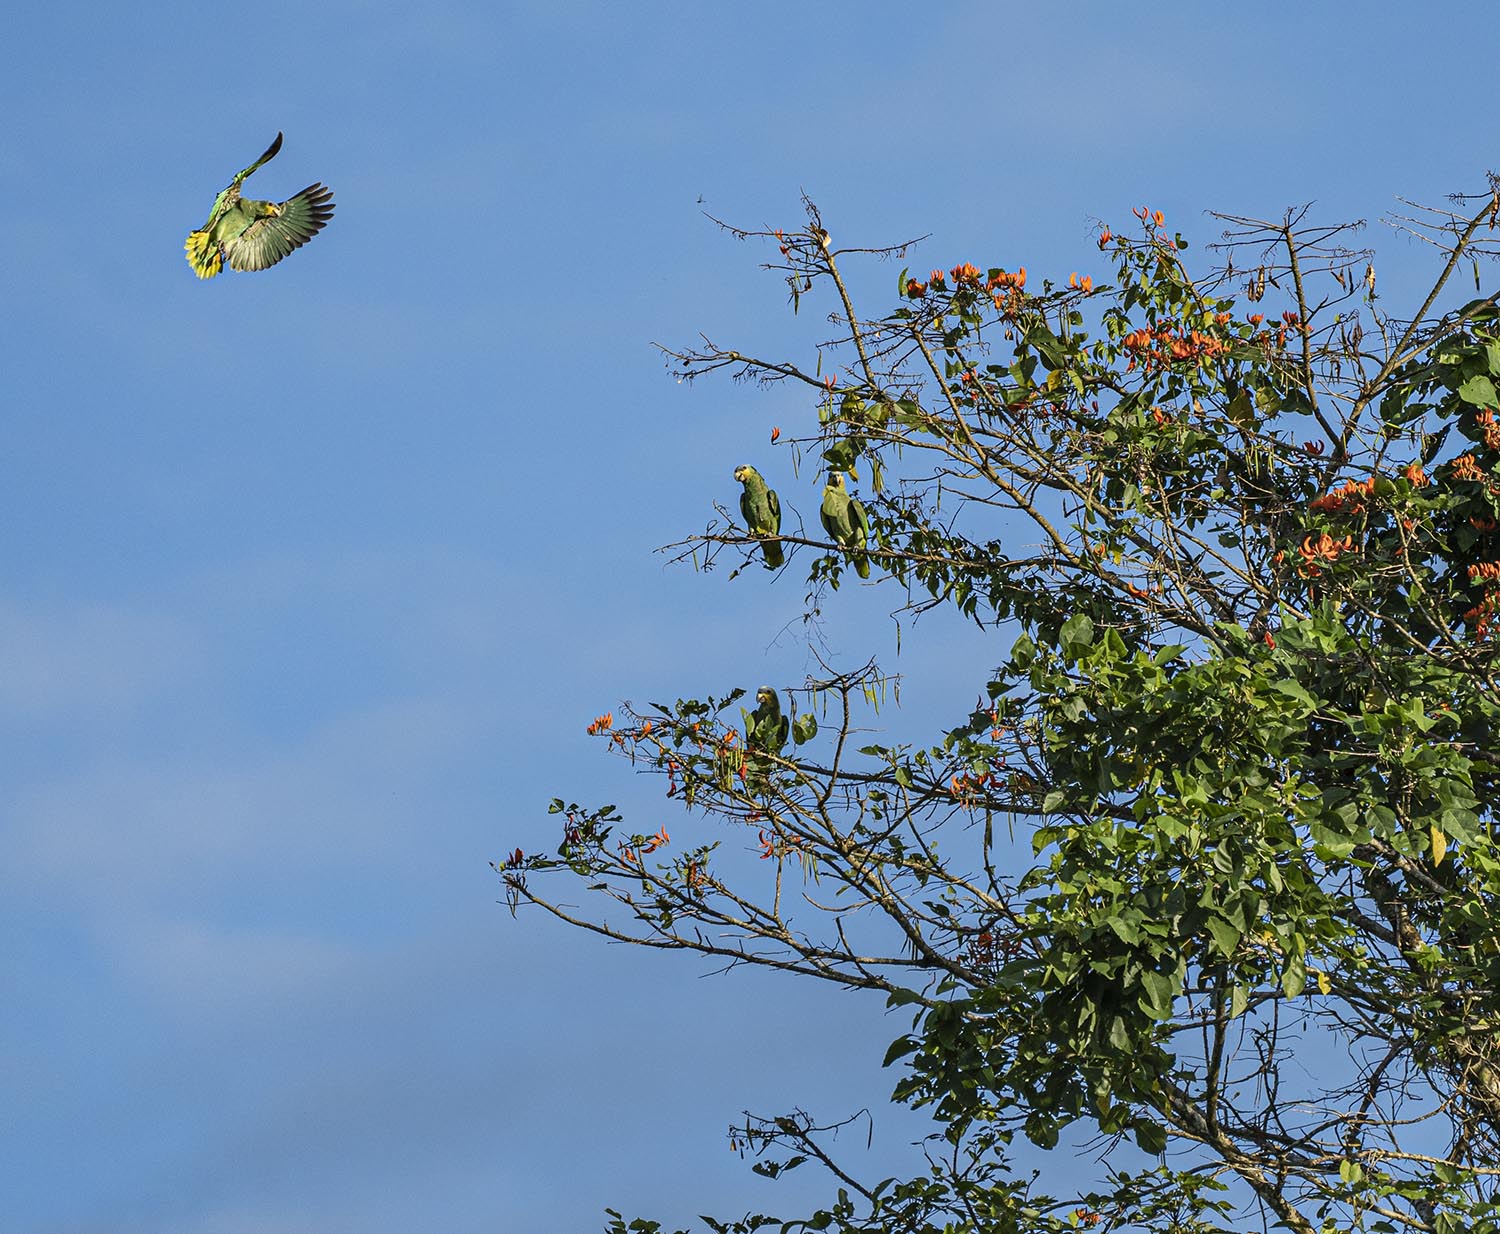 A green parrot spreading its wings to land in a tree, next to other parrots